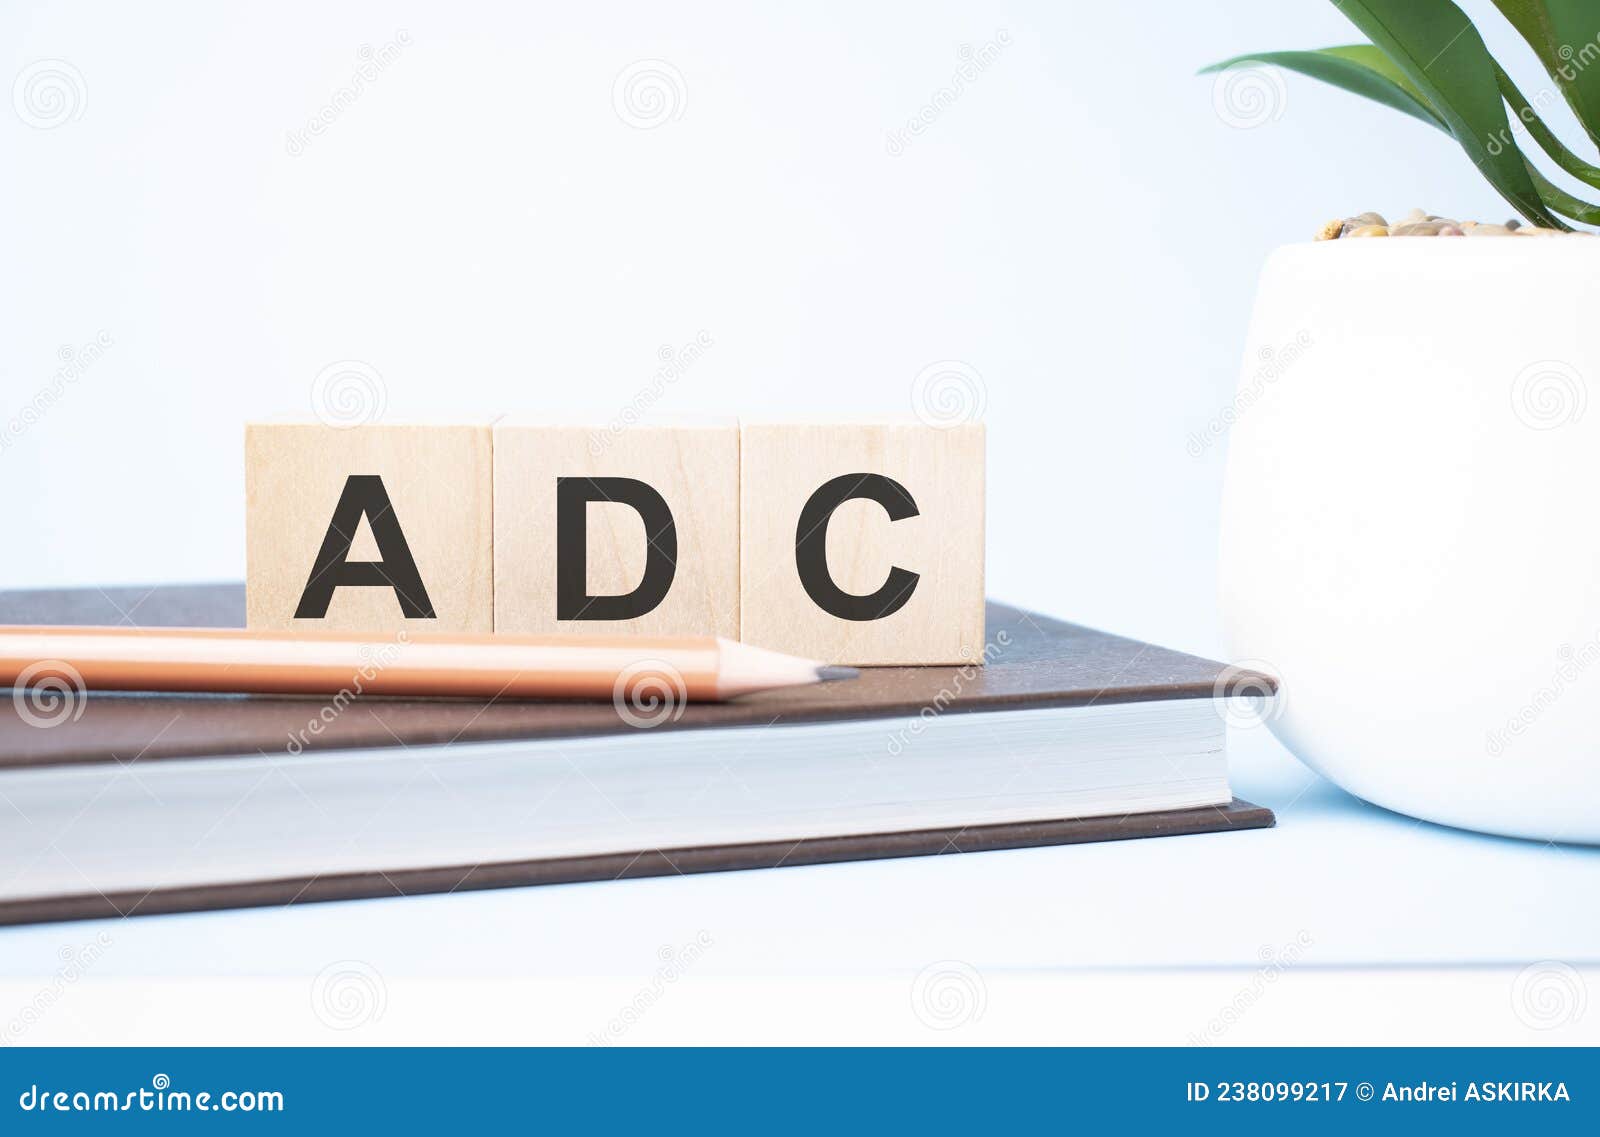 adc acronym on building blocks supported by two different size pencils. copy space